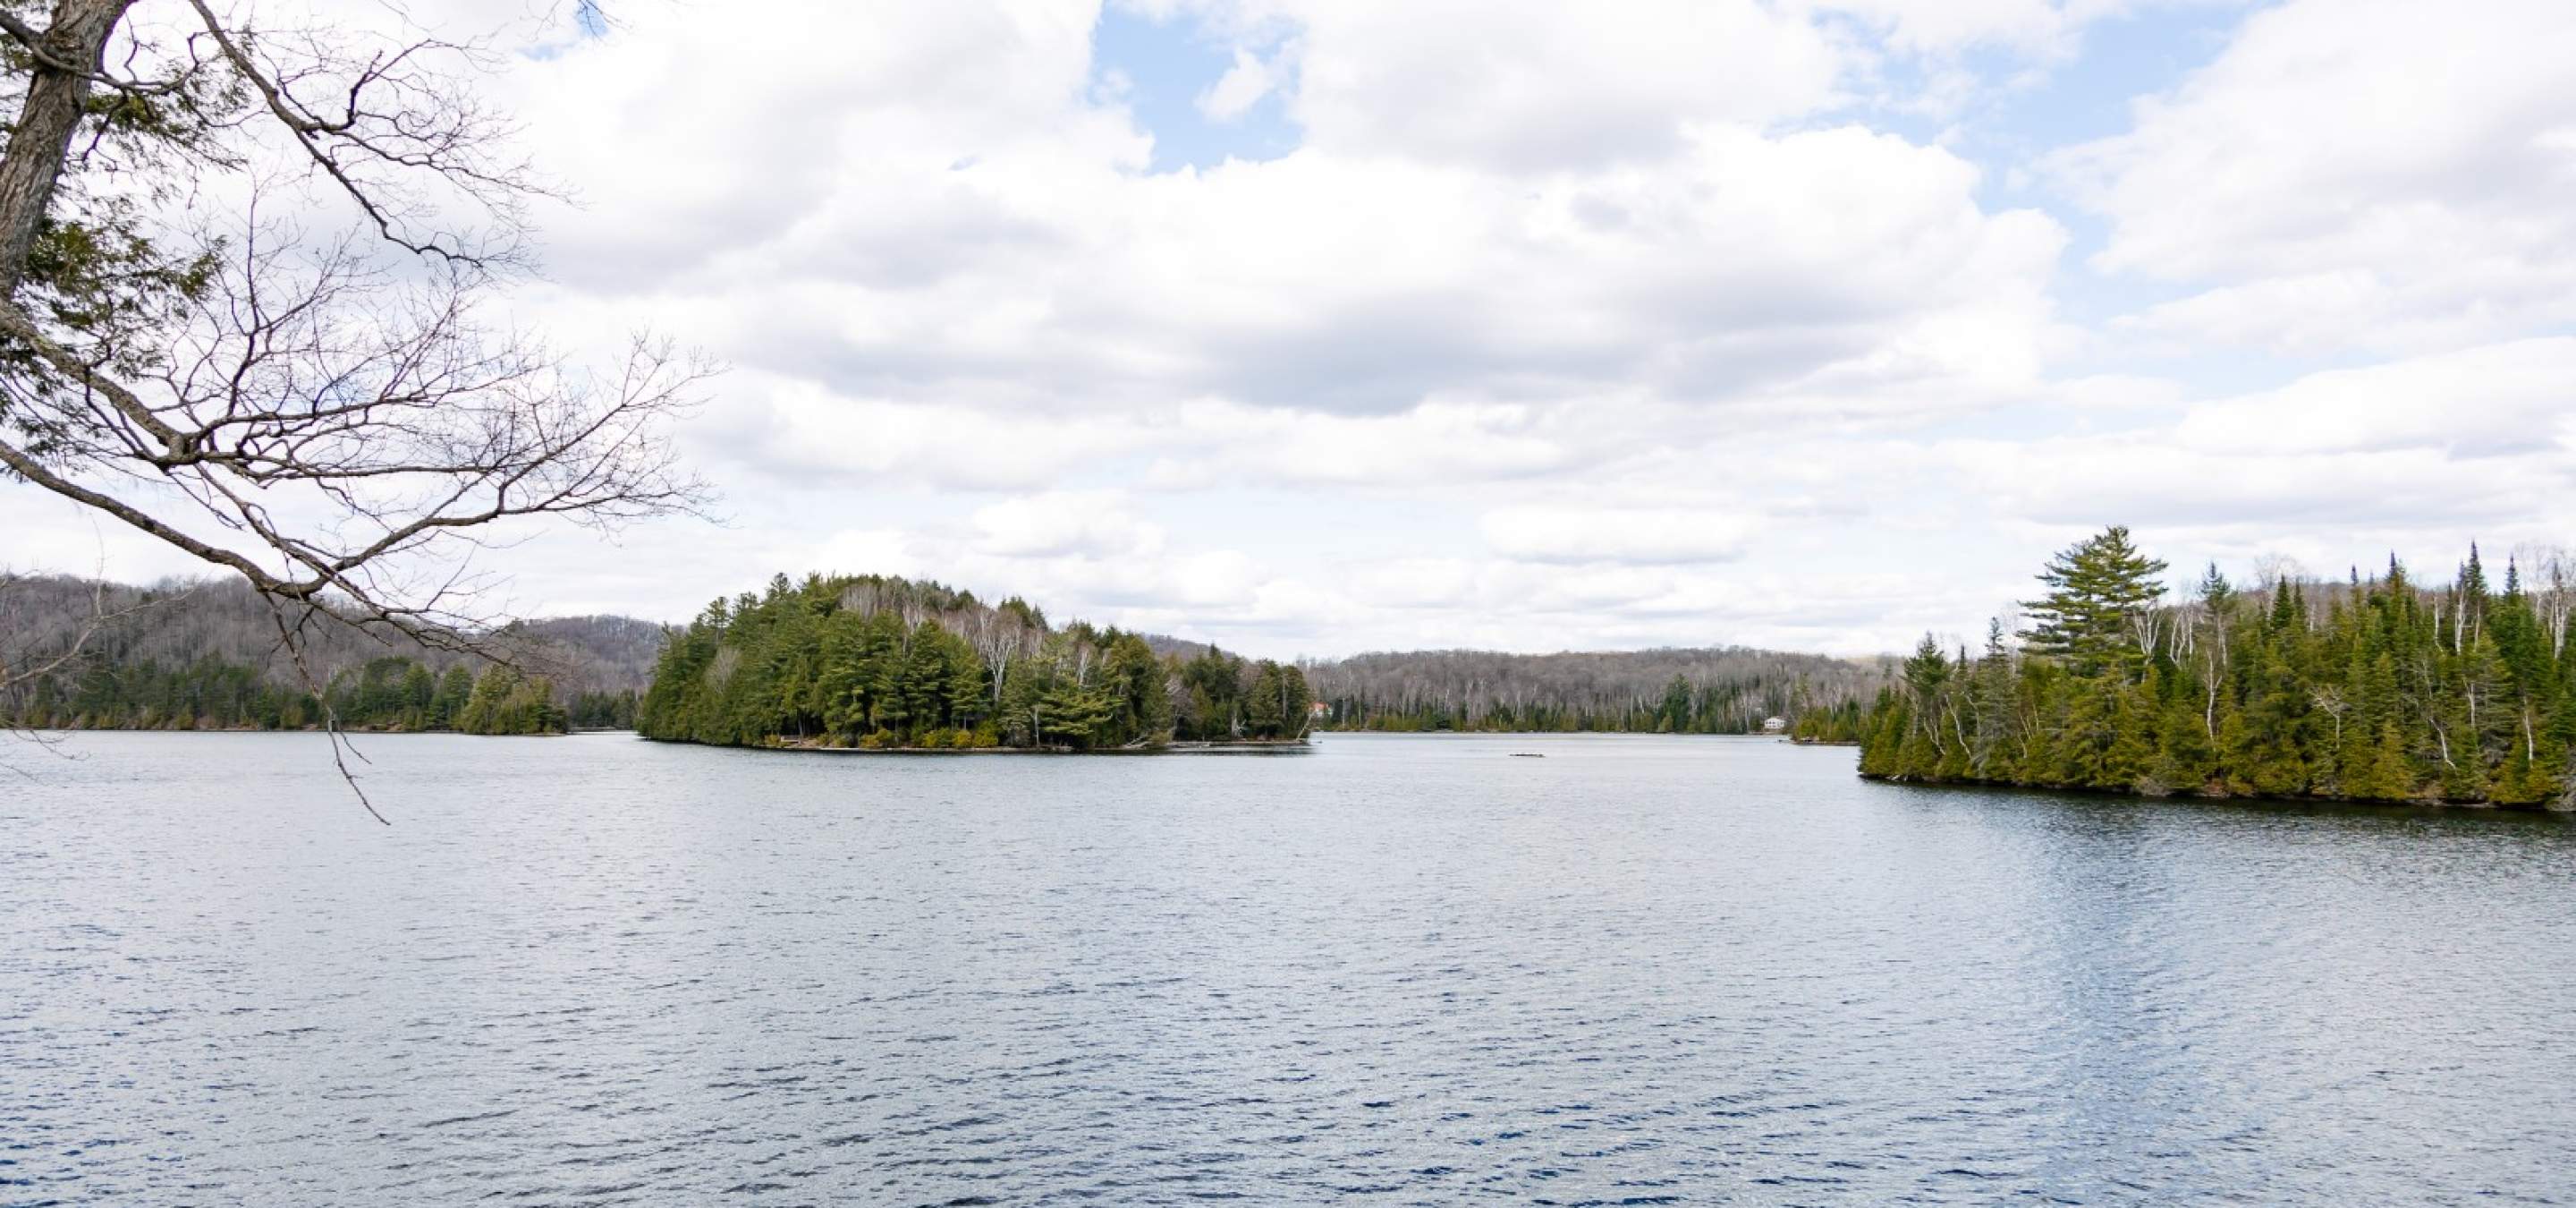 Lake with islands featuring green trees, cloudy sky with some clear blue. 